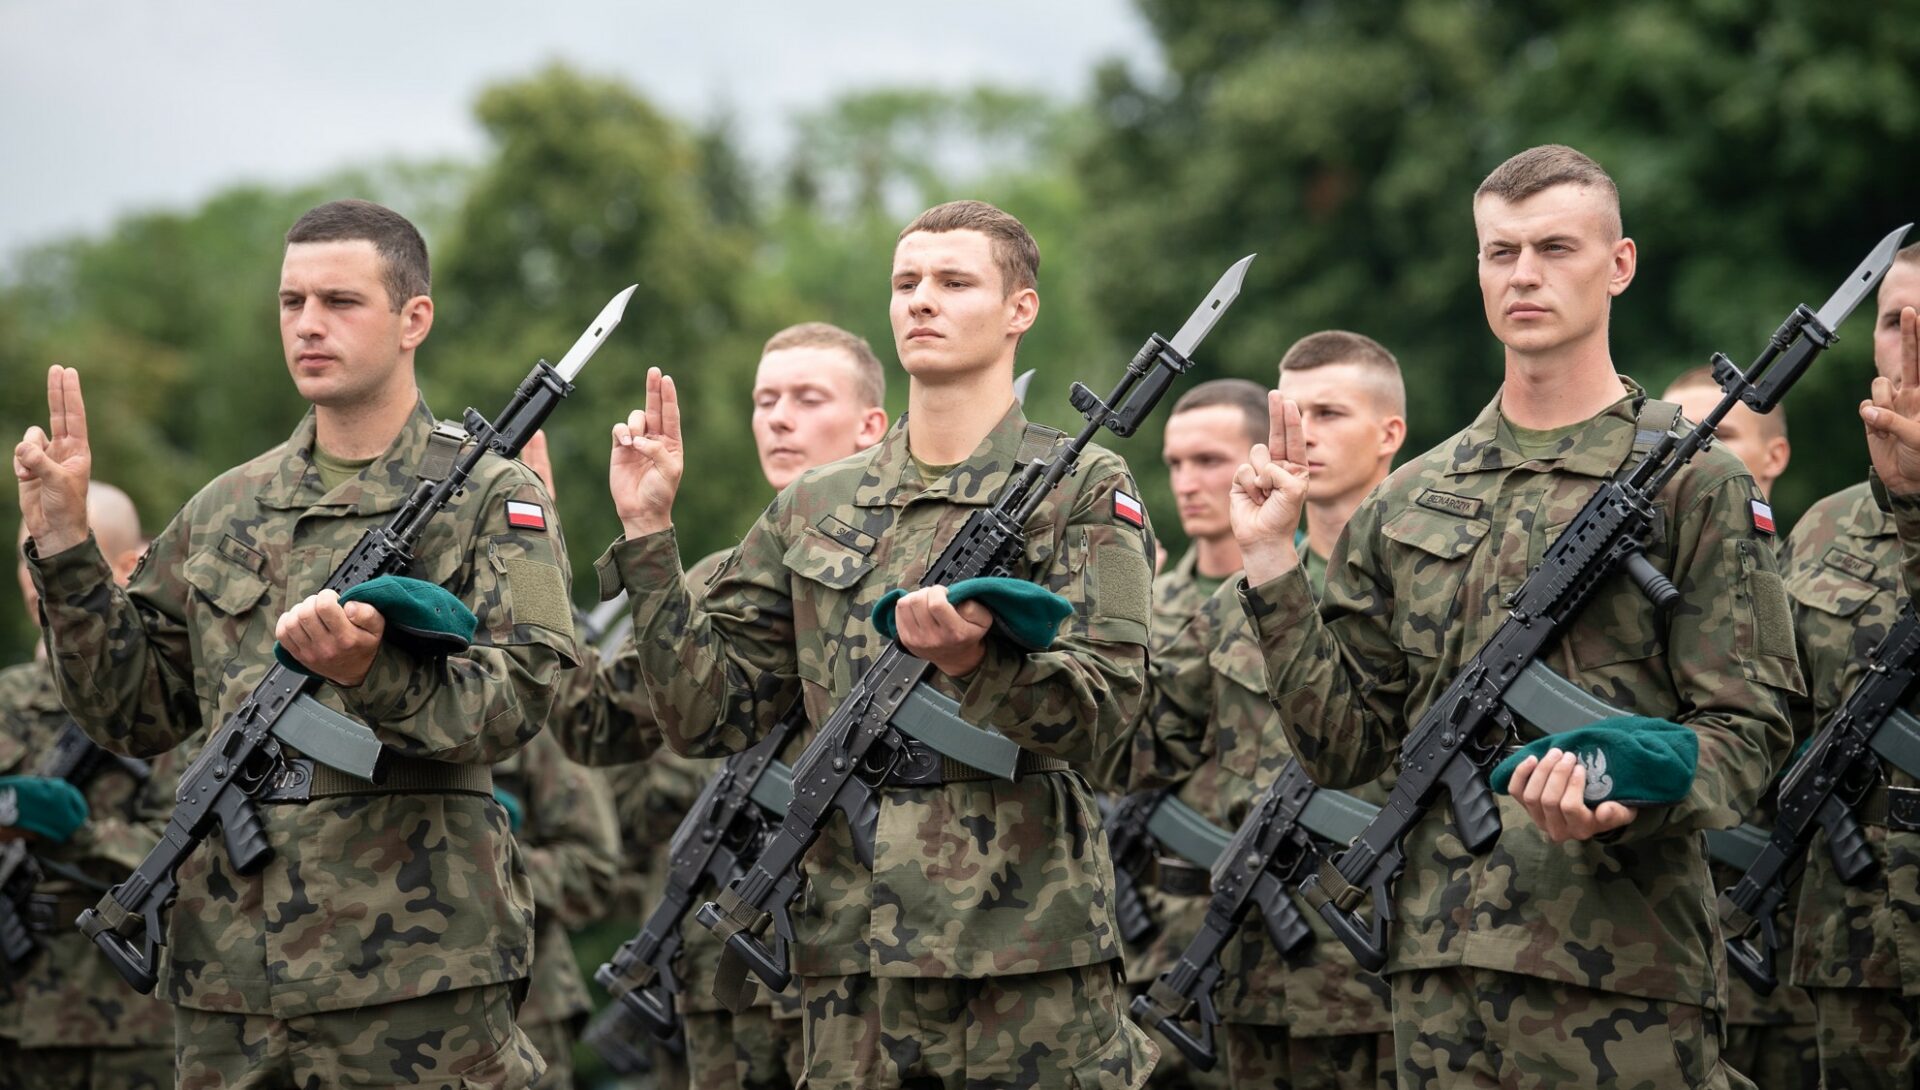 Over 800 volunteers took the military oath in Poland today